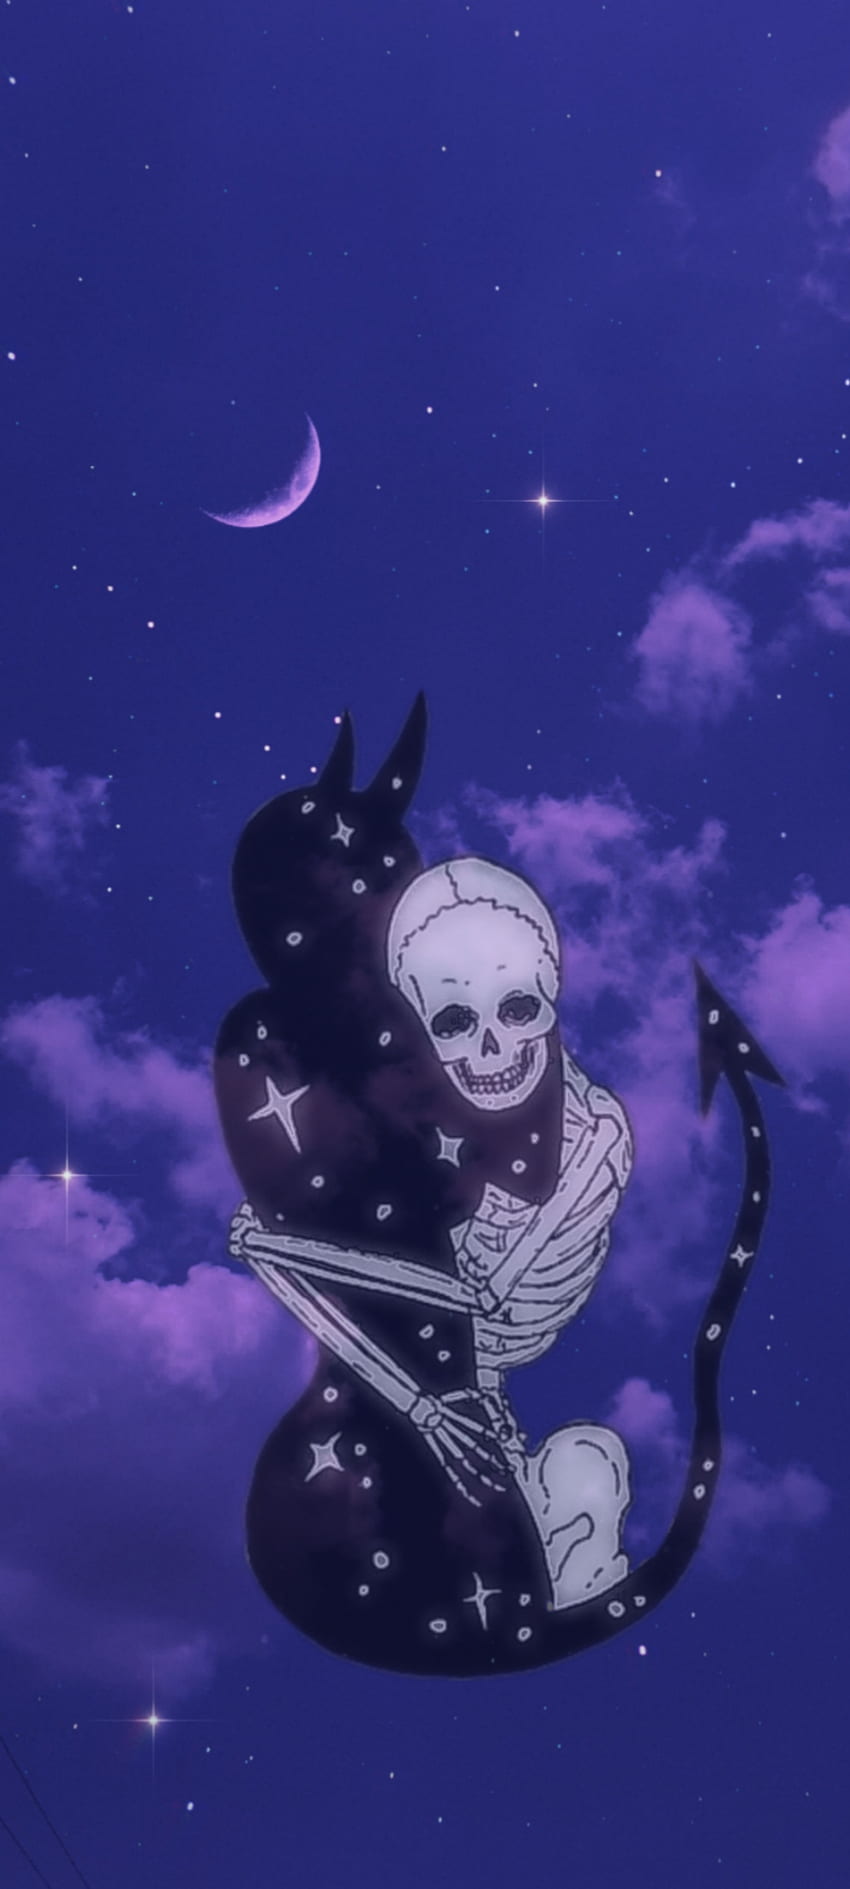 Anime Corner - These skeleton characters are so humerus! 😉😆 Vote for Anime  of the Week: https://acani.me/vfall-02 | Facebook